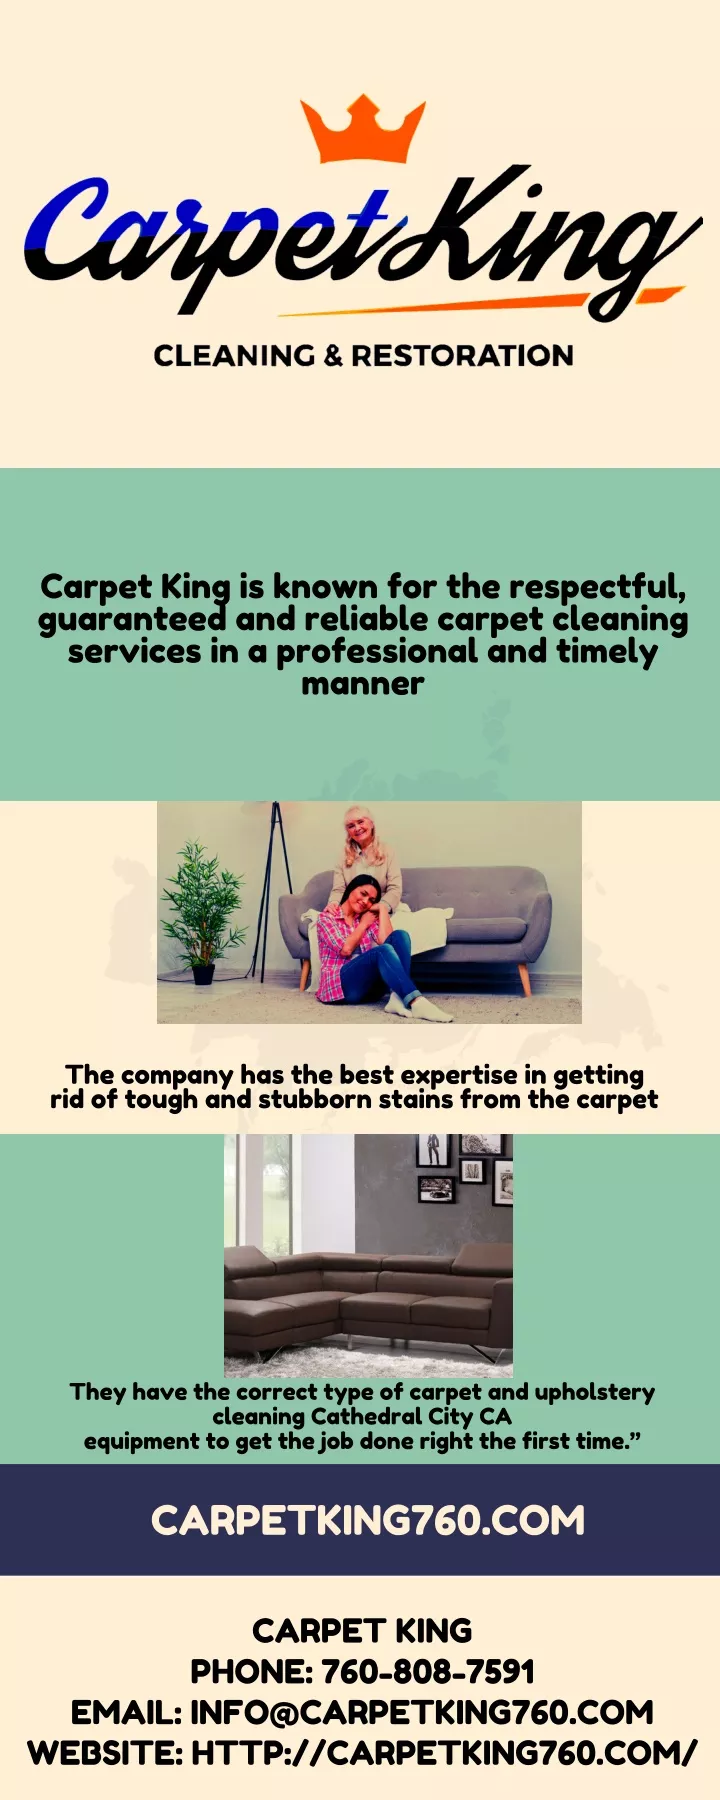 carpet king is known for the respectful